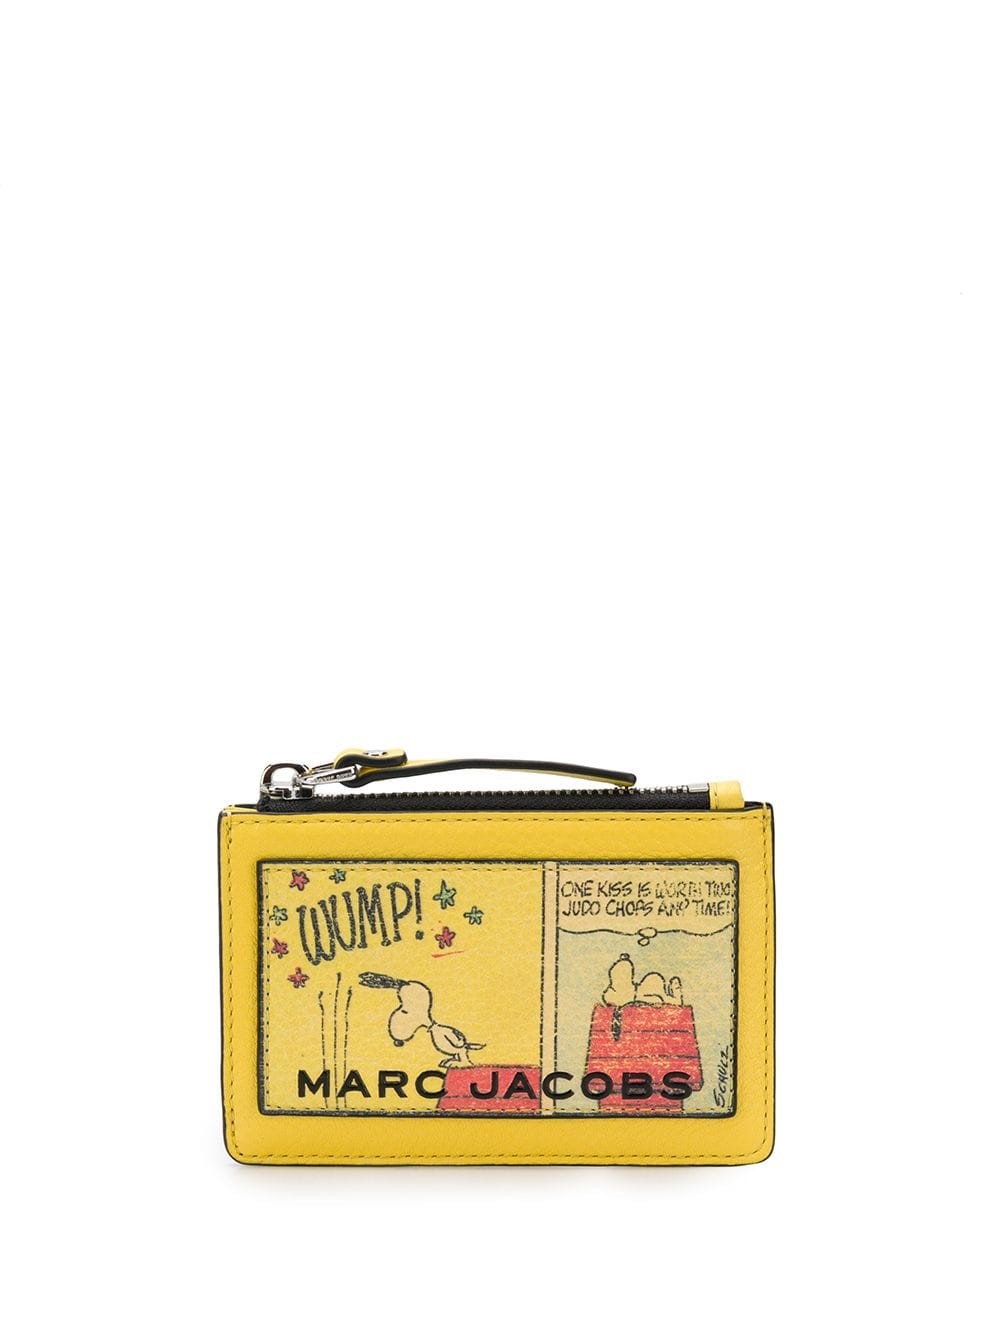 marc jacobs SNOOPY ZIPPED WALLET available on montiboutique.com 